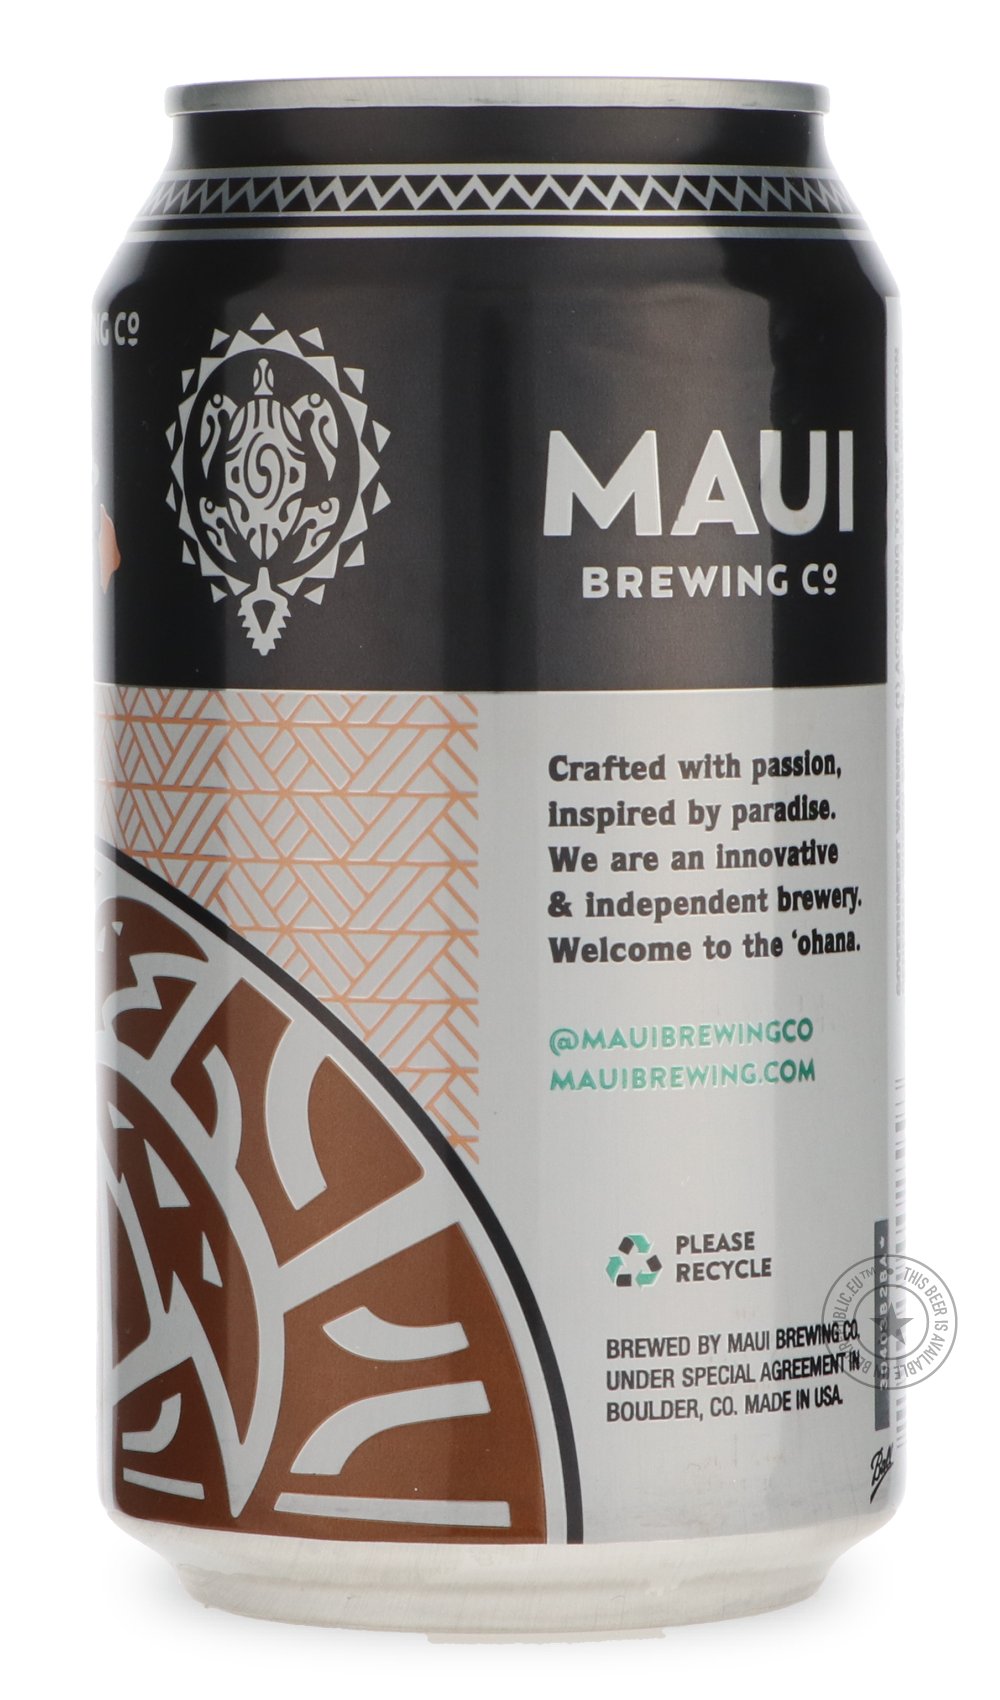 -Maui- Coconut Hiwa-Stout & Porter- Only @ Beer Republic - The best online beer store for American & Canadian craft beer - Buy beer online from the USA and Canada - Bier online kopen - Amerikaans bier kopen - Craft beer store - Craft beer kopen - Amerikanisch bier kaufen - Bier online kaufen - Acheter biere online - IPA - Stout - Porter - New England IPA - Hazy IPA - Imperial Stout - Barrel Aged - Barrel Aged Imperial Stout - Brown - Dark beer - Blond - Blonde - Pilsner - Lager - Wheat - Weizen - Amber - Ba